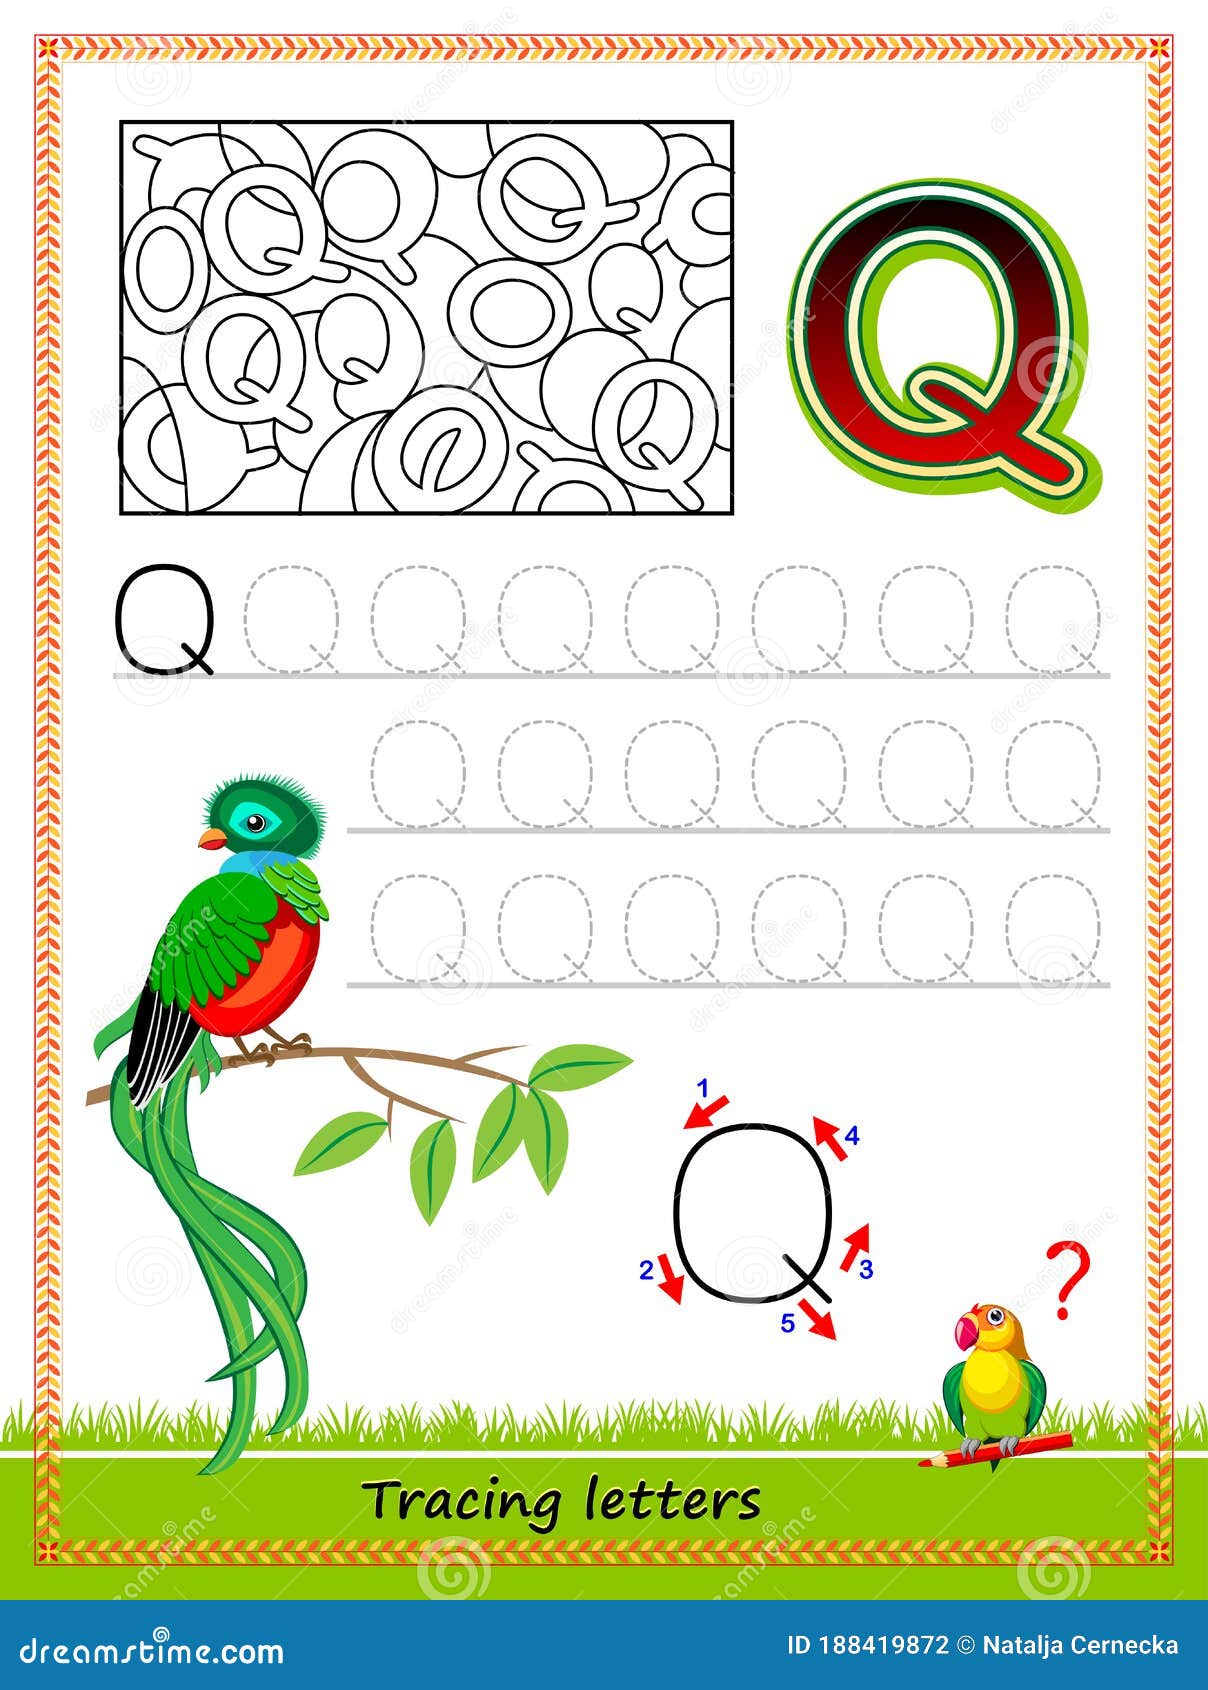 Worksheet for tracing letters find and paint all letters q kids activity sheet educational page for children coloring book stock vector